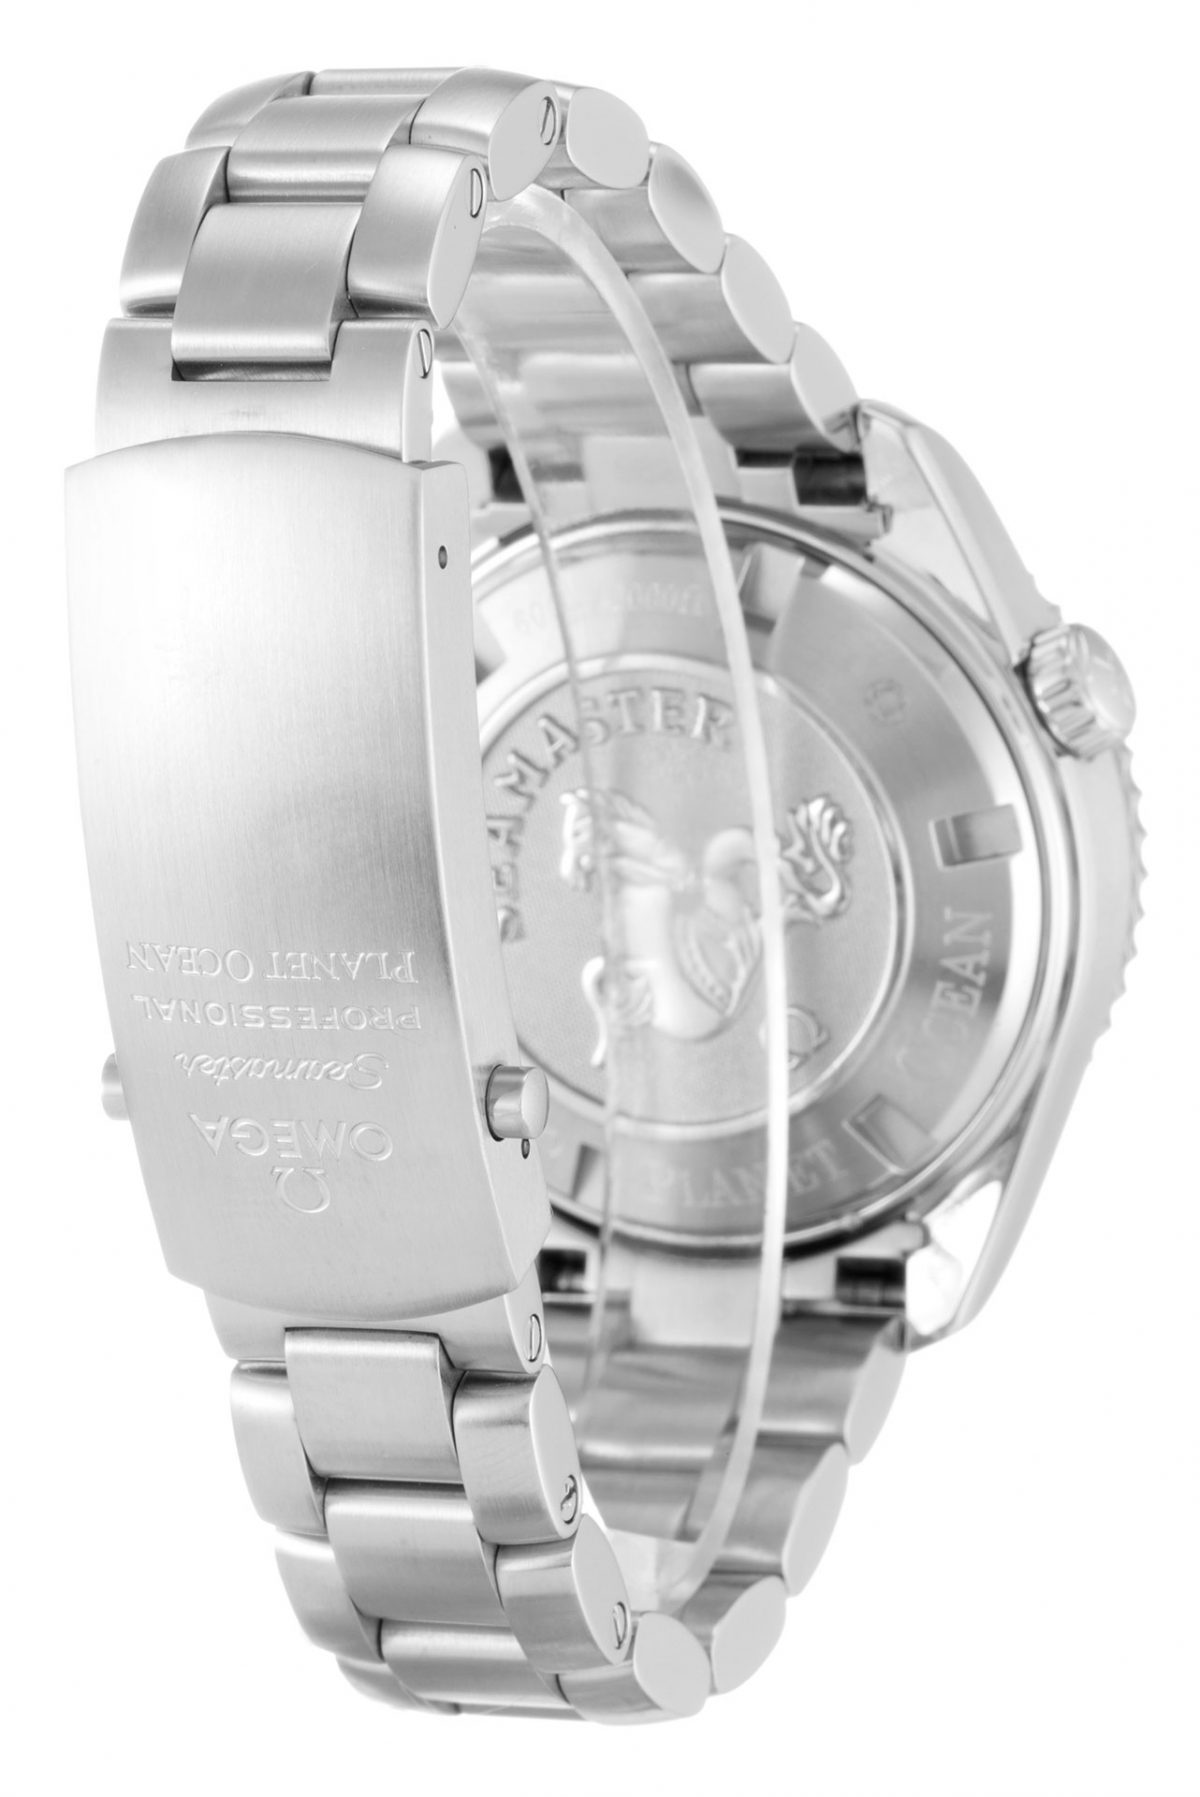 Omega Planet Ocean 222.30.38.50.01.001 Mens Steel Automatic Watch